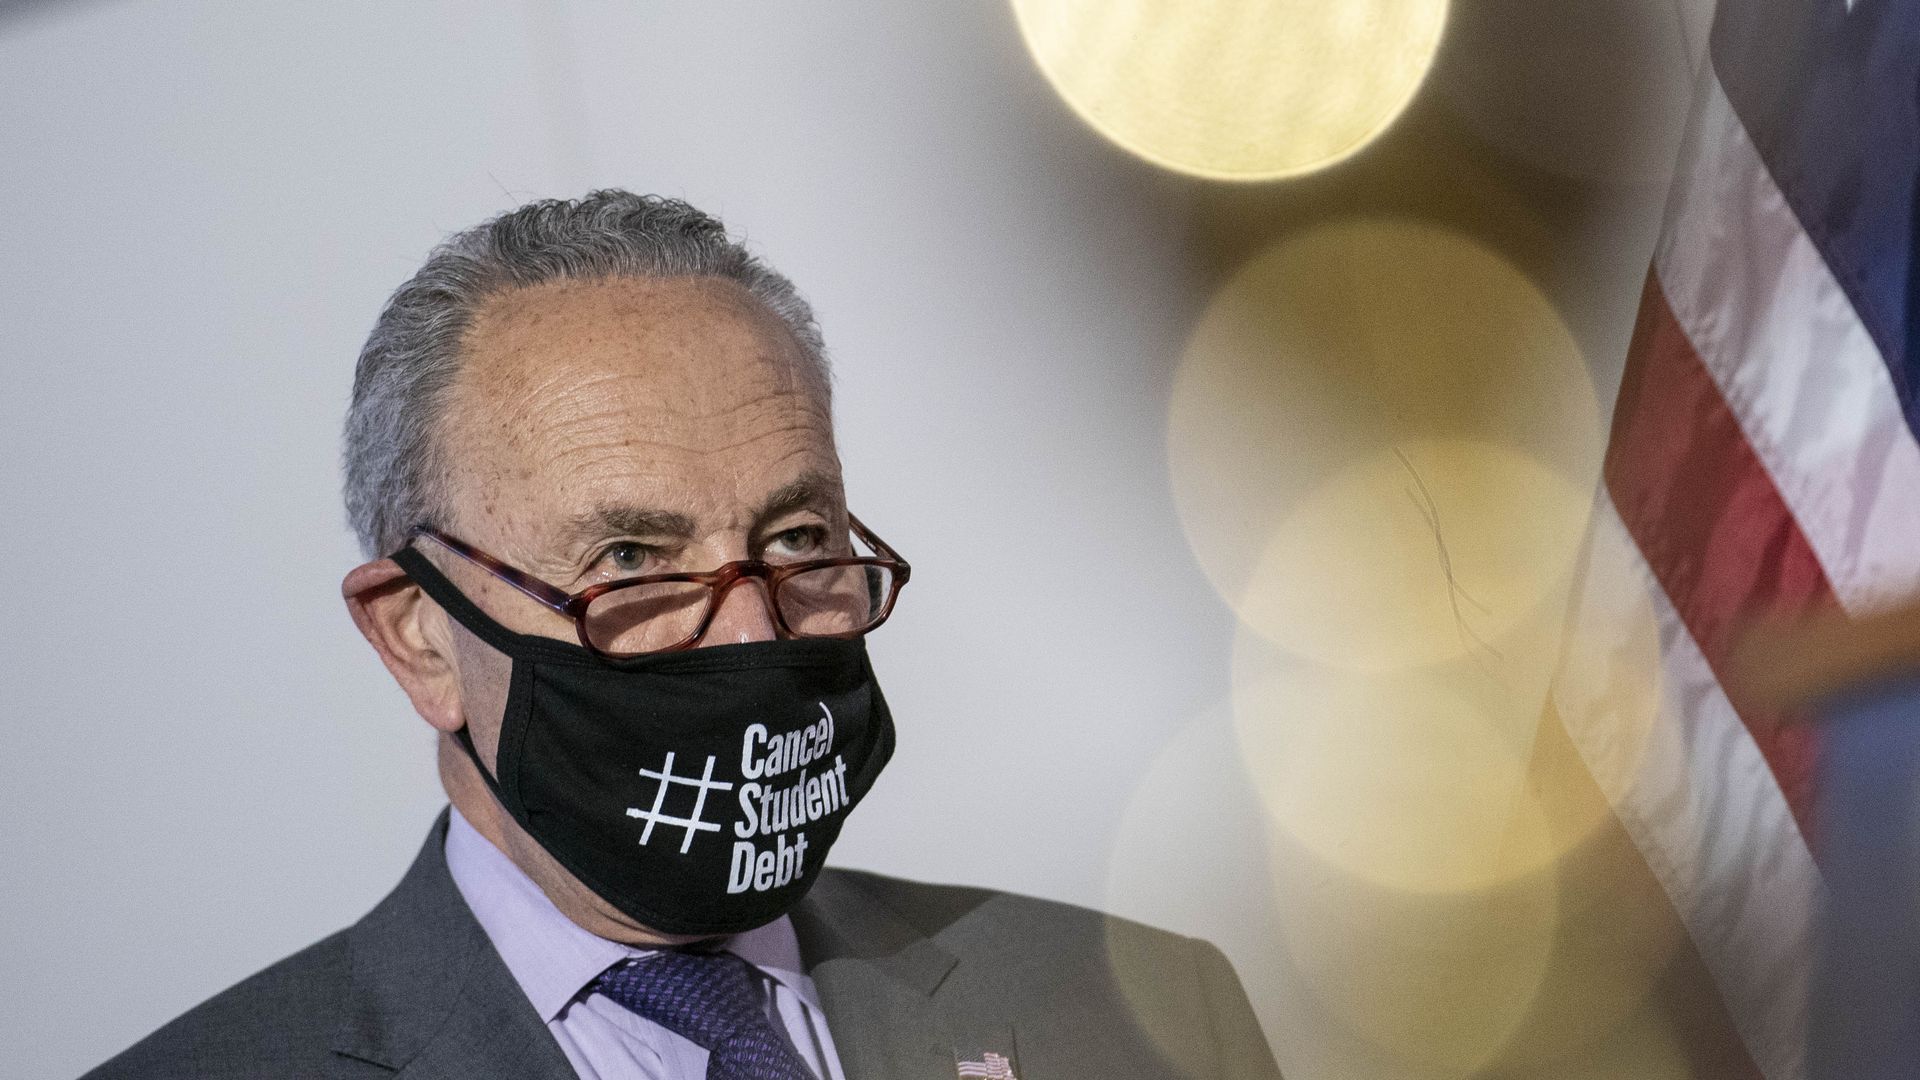 Photo of Chuck Schumer wearing a face mask that says "#Cancel Student Debt"